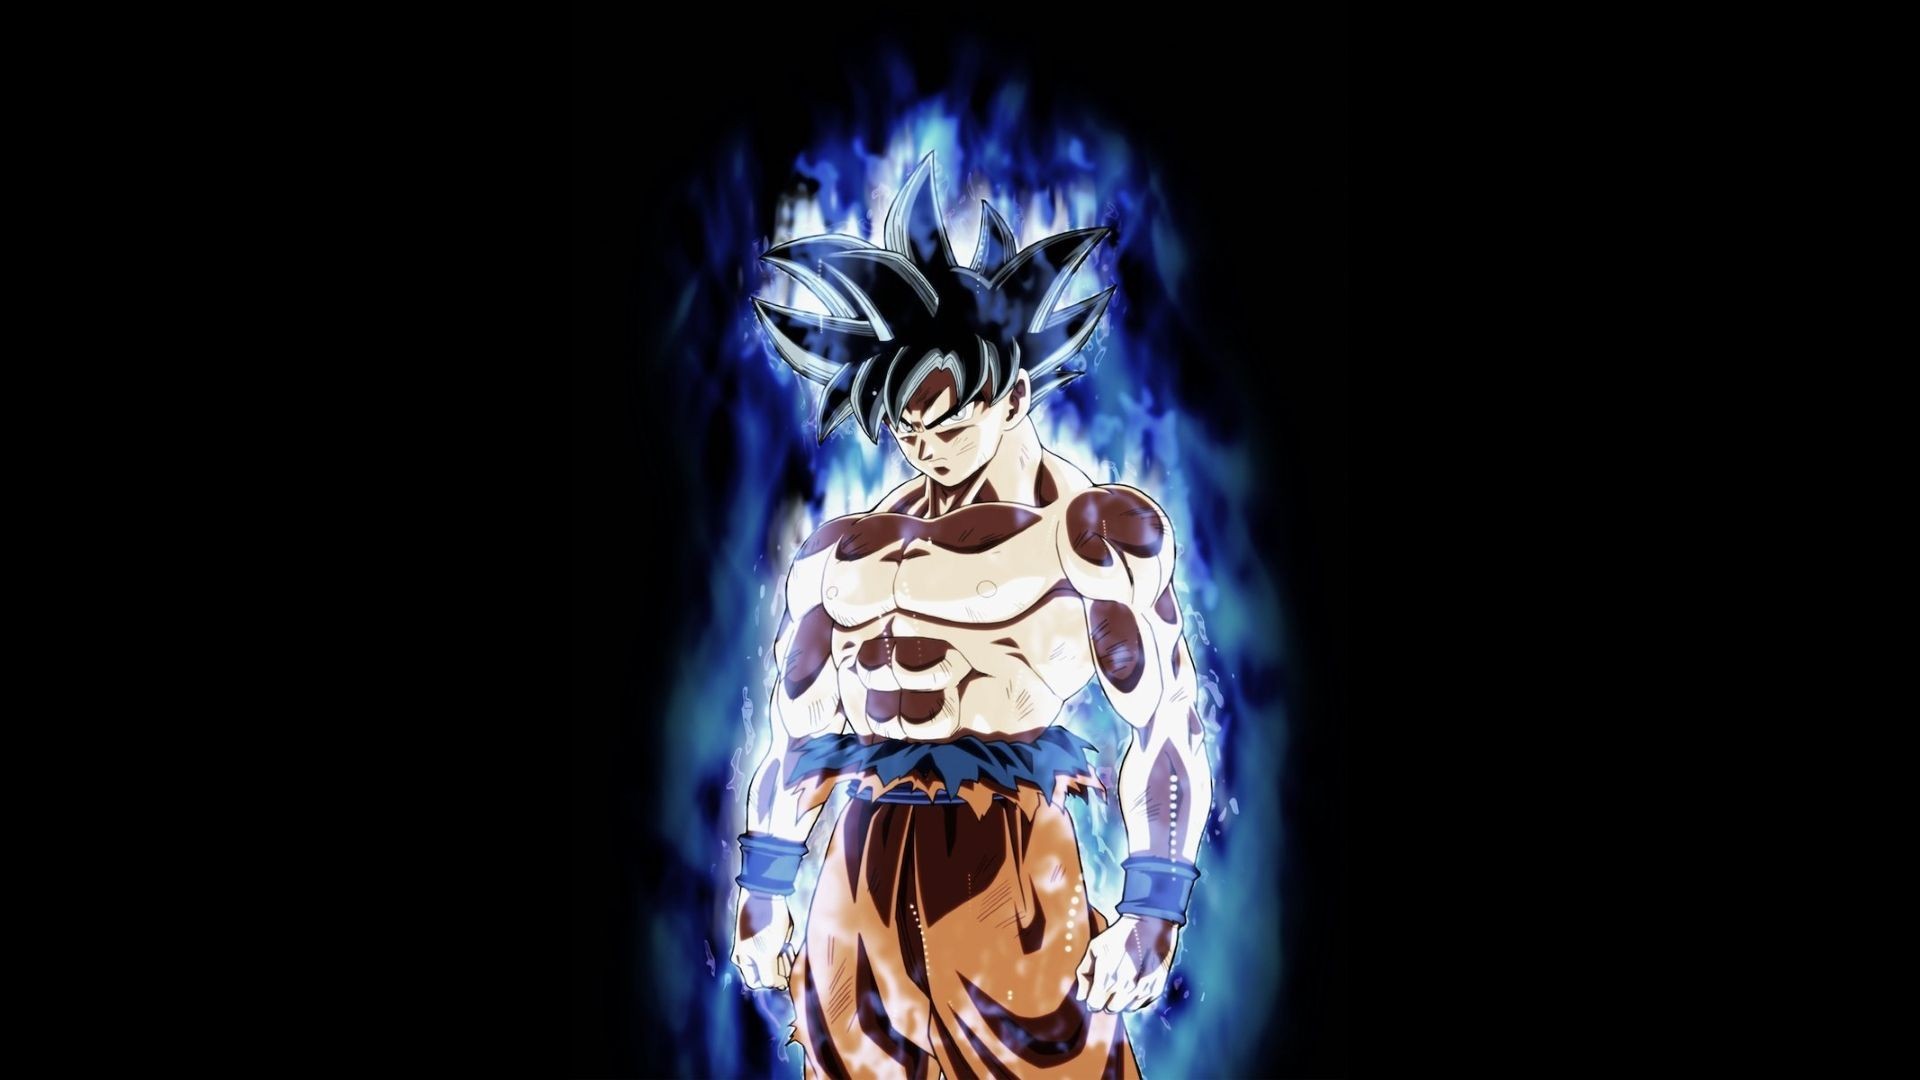 HD Wallpaper Goku Images With Resolution 1920X1080 pixel. You can make this wallpaper for your Desktop Computer Backgrounds, Mac Wallpapers, Android Lock screen or iPhone Screensavers